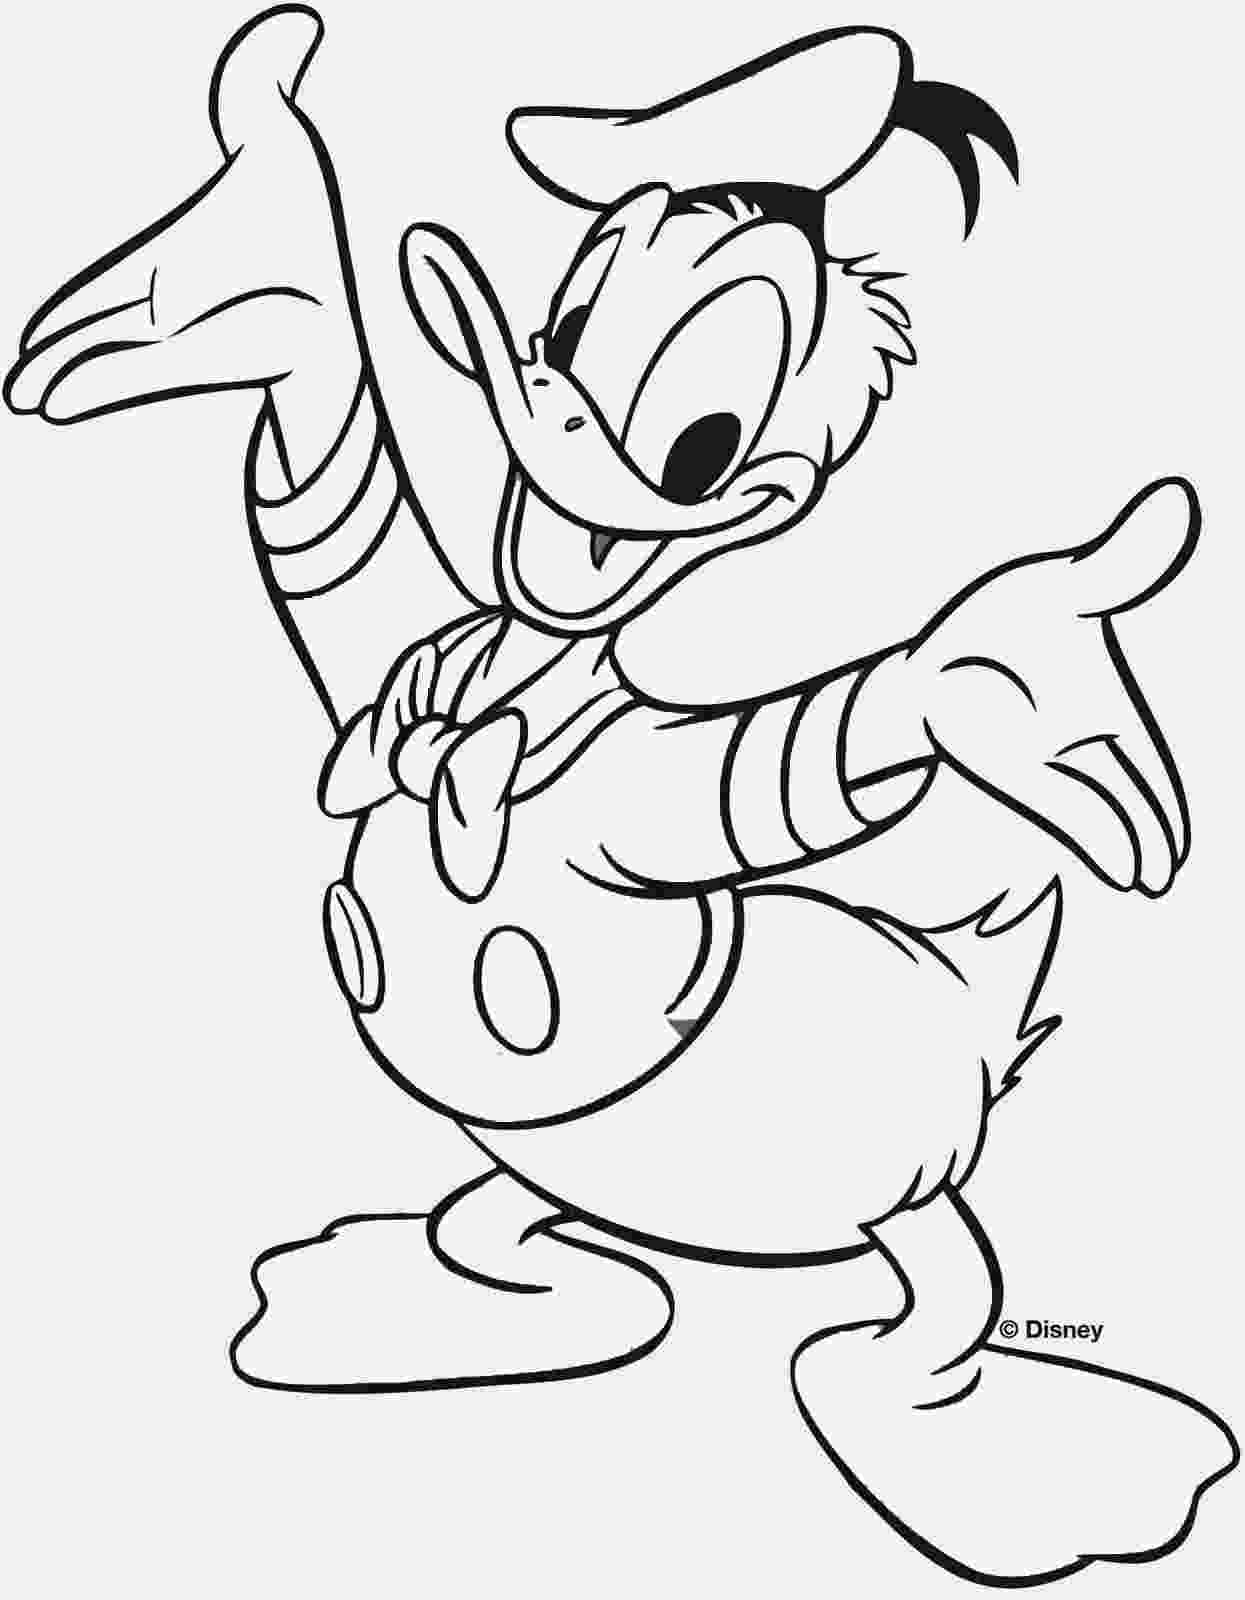 donald duck images for colouring coloring blog for kids donald duck coloring pages images colouring duck donald for 